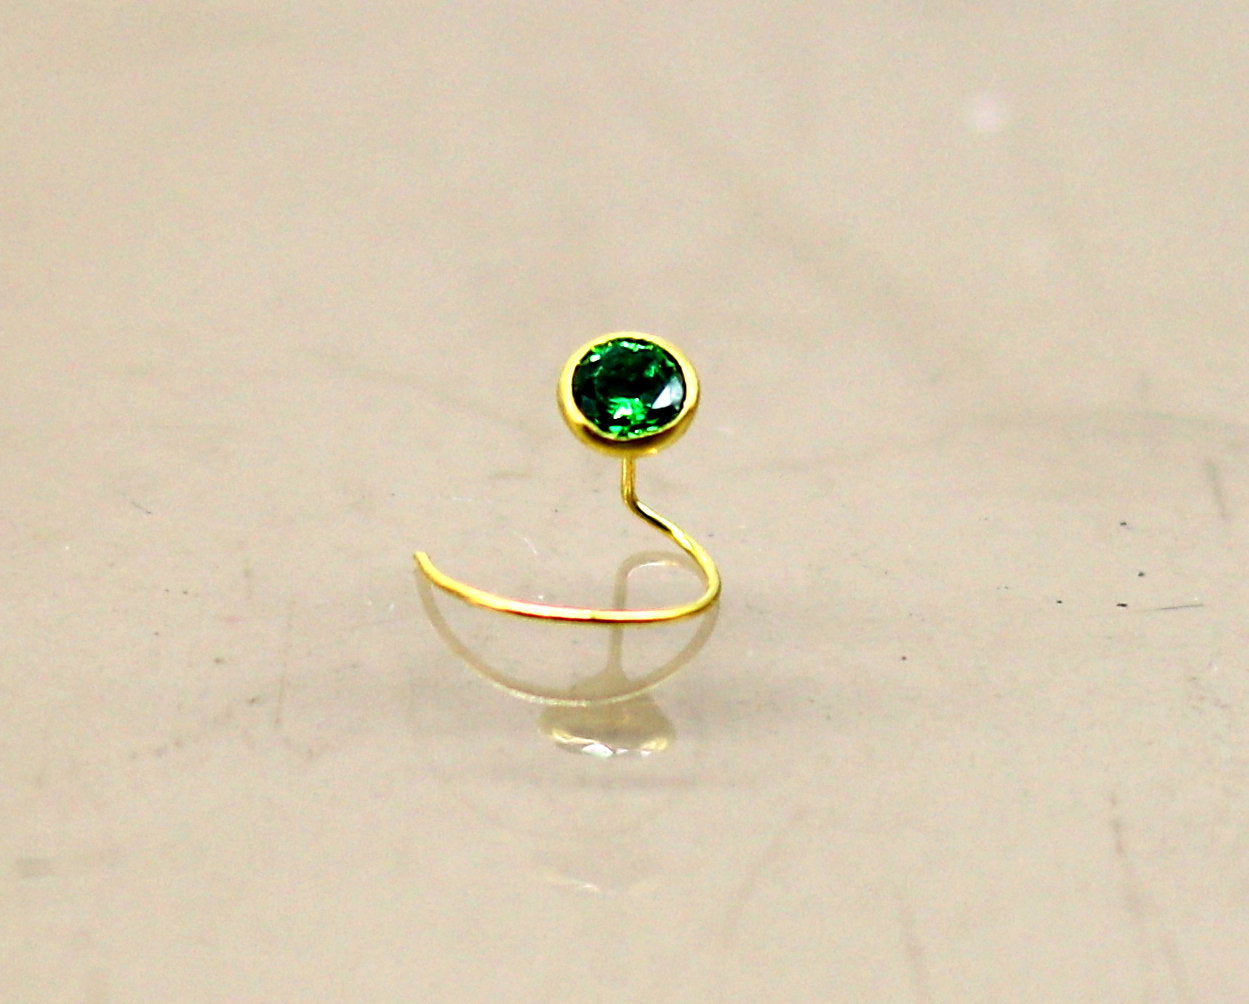 3.5mm tiny 18kt yellow gold handmade single stone nose pin U band nose stud cartilage customized pretty green stone jewelry gnp32 - TRIBAL ORNAMENTS